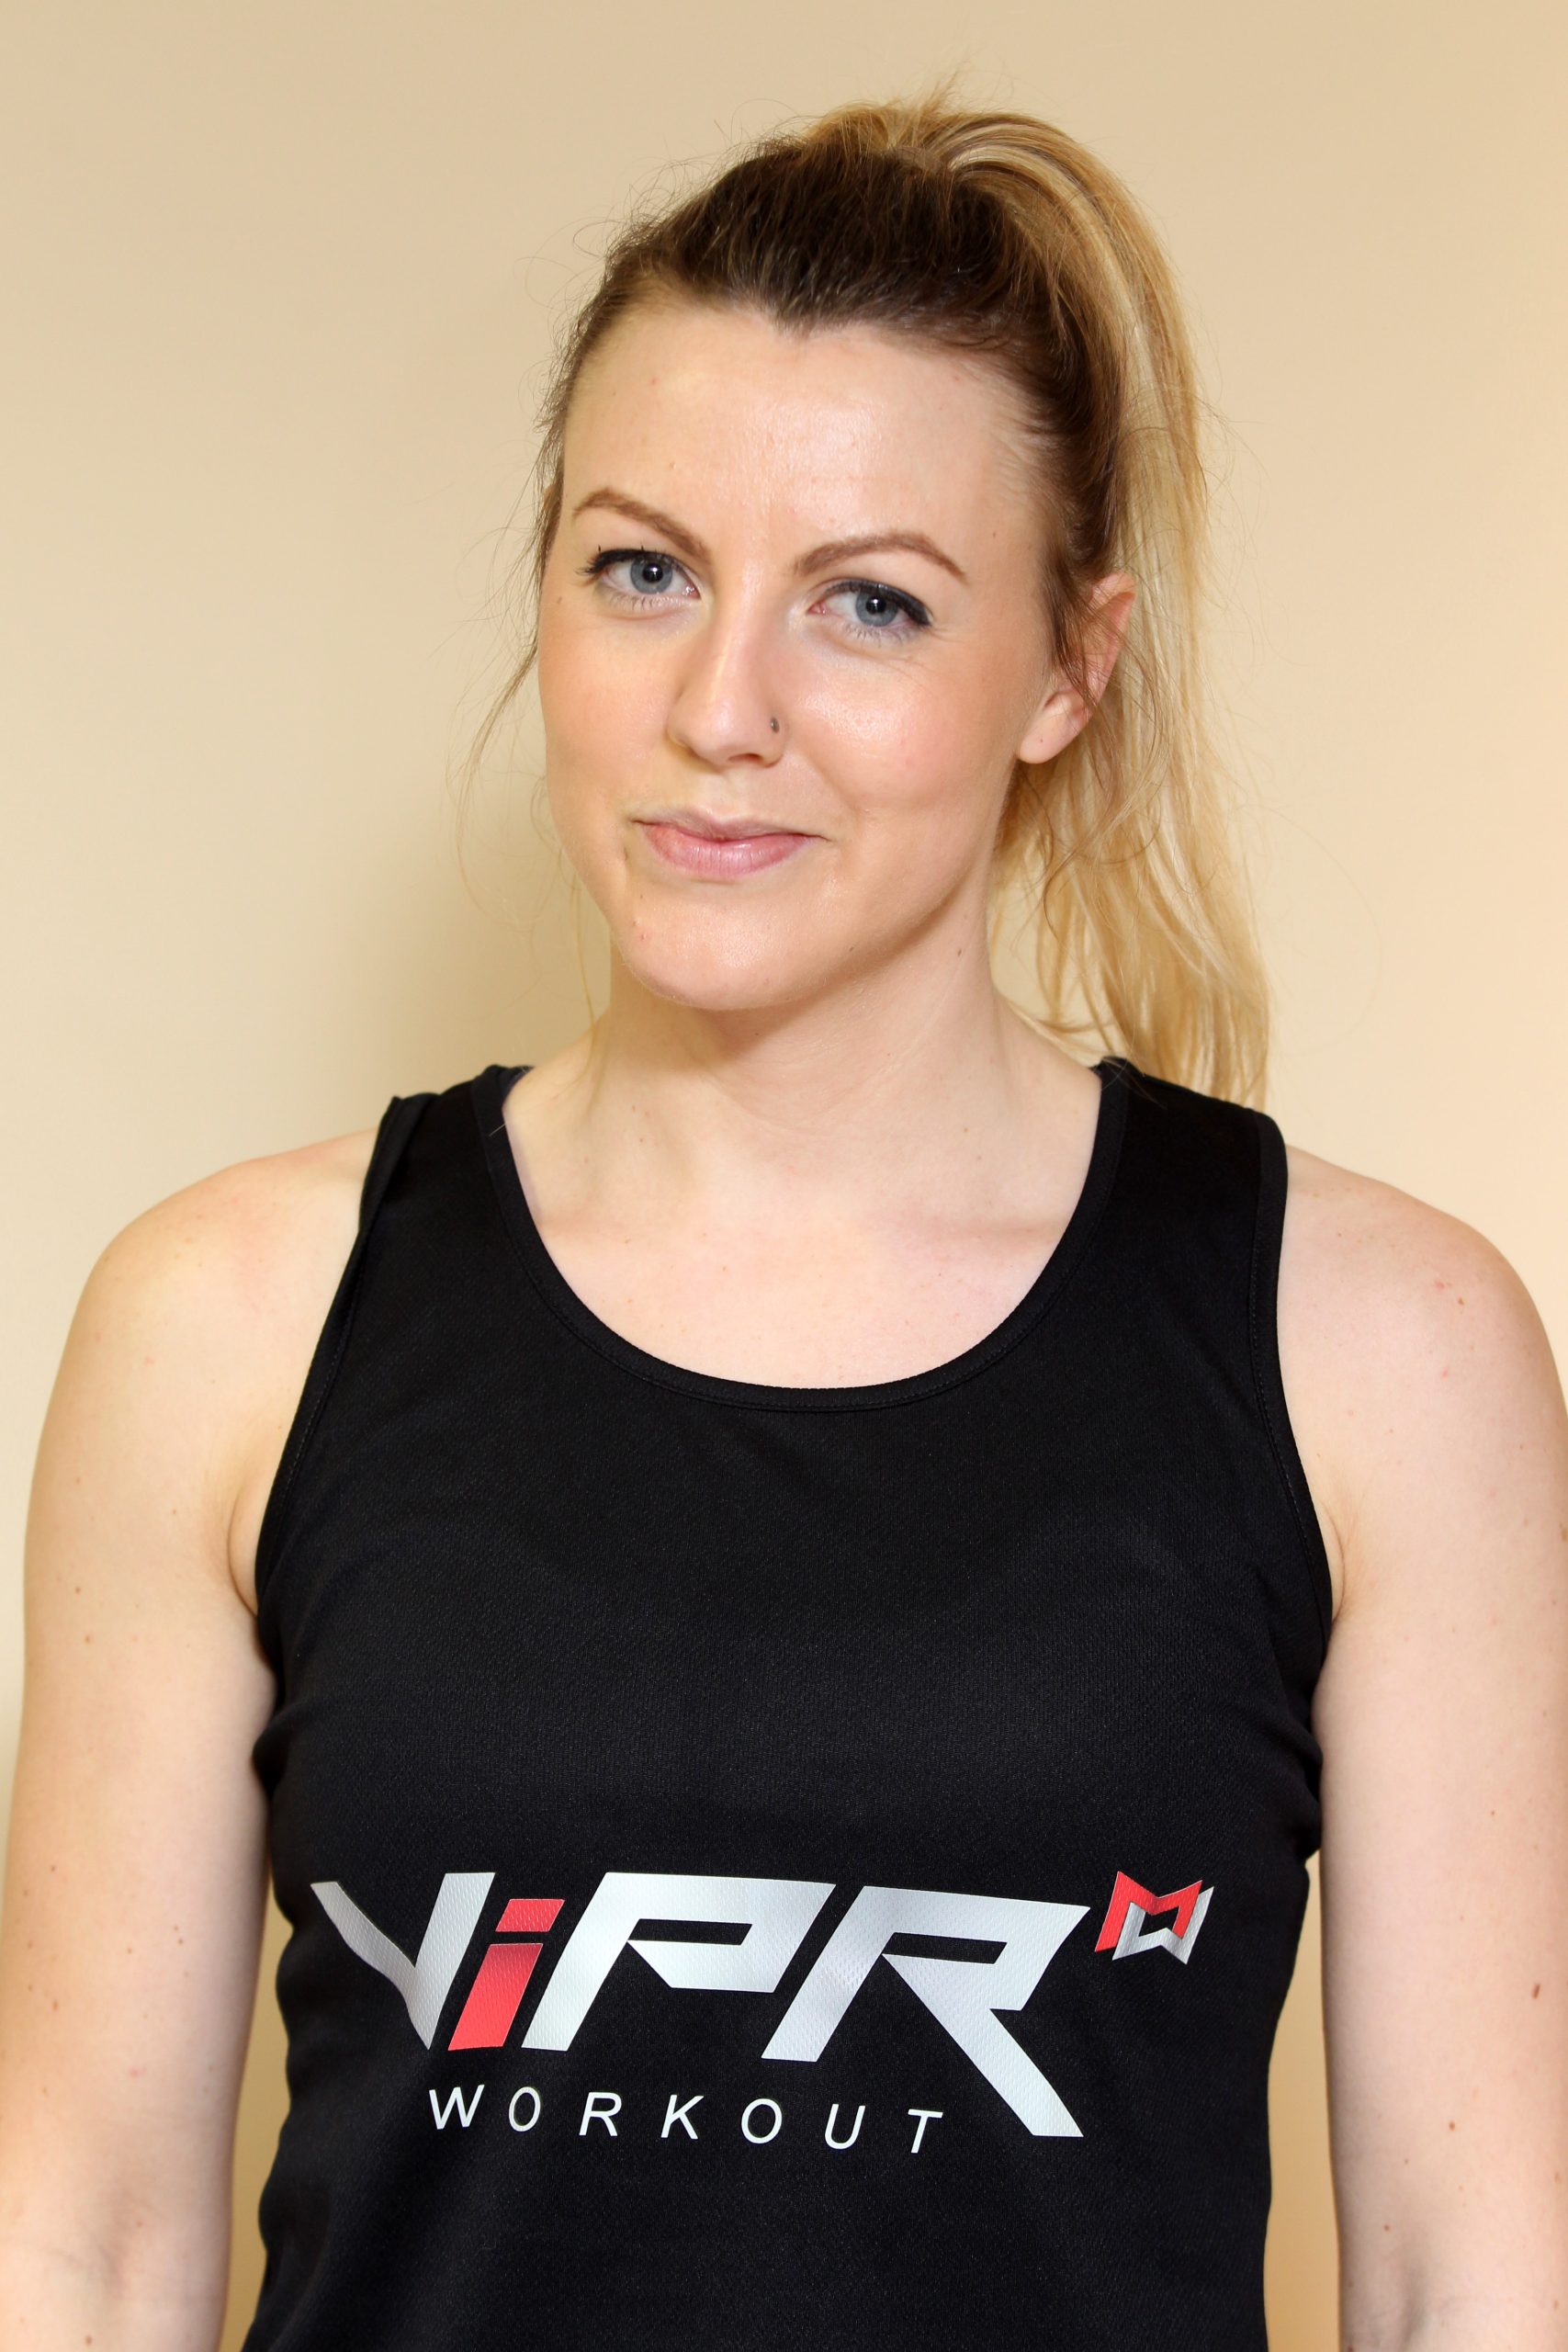 FitPro National trainer, Holly Lynch